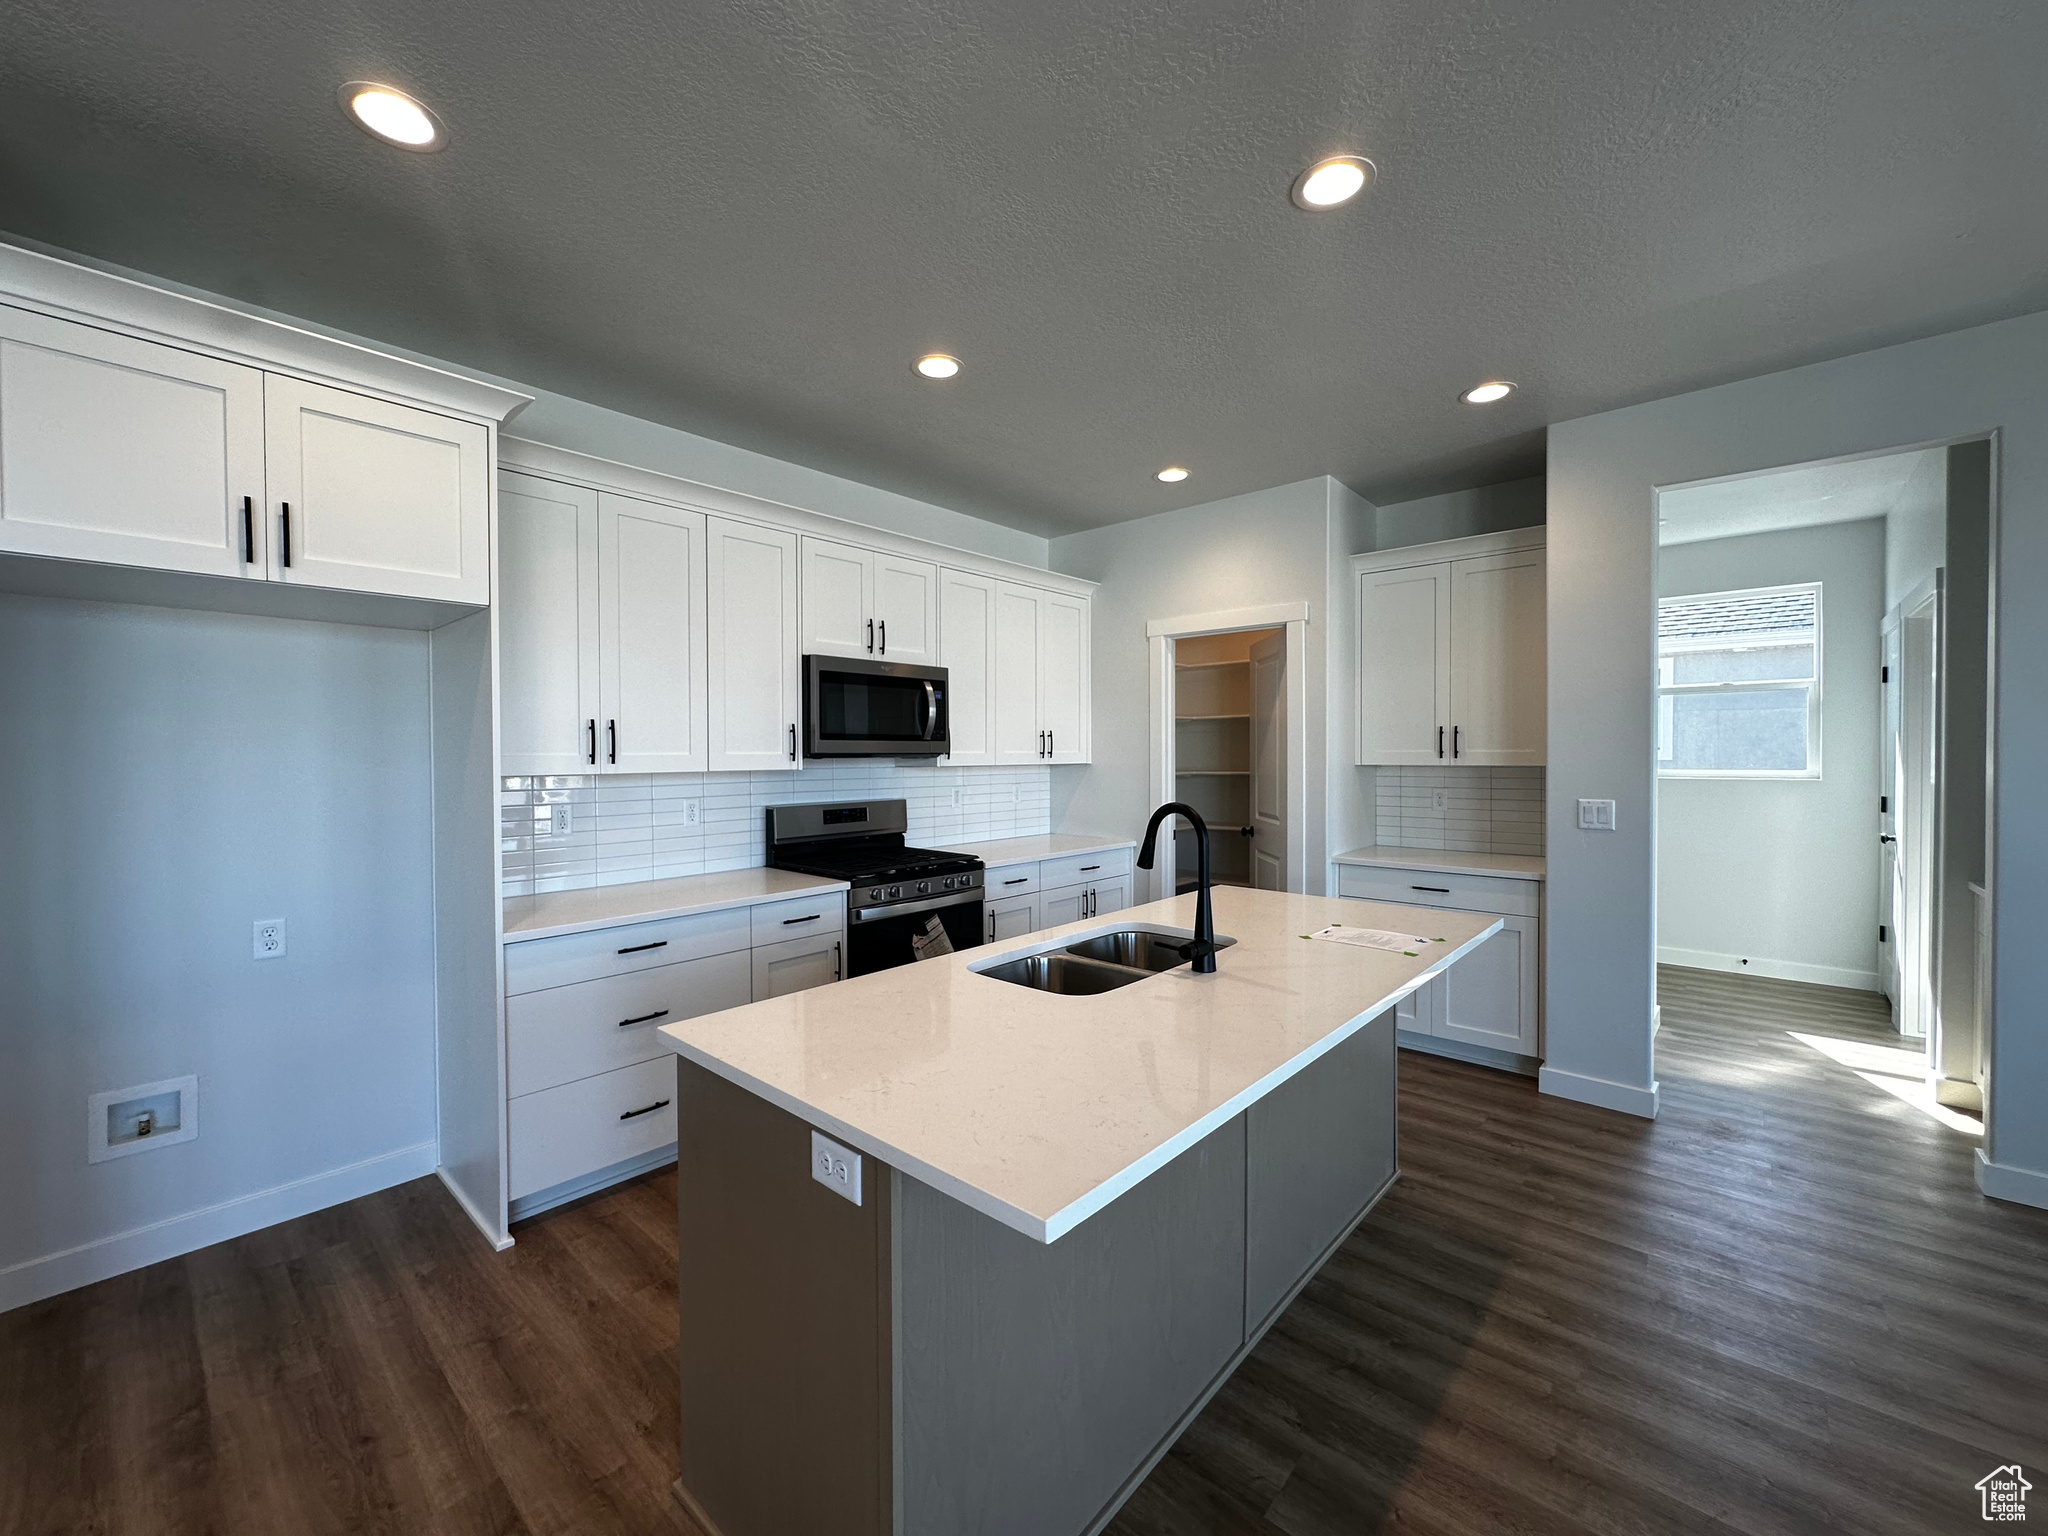 Kitchen featuring white cabinetry, appliances with stainless steel finishes, dark hardwood / wood-style floors, a kitchen island with sink, and sink